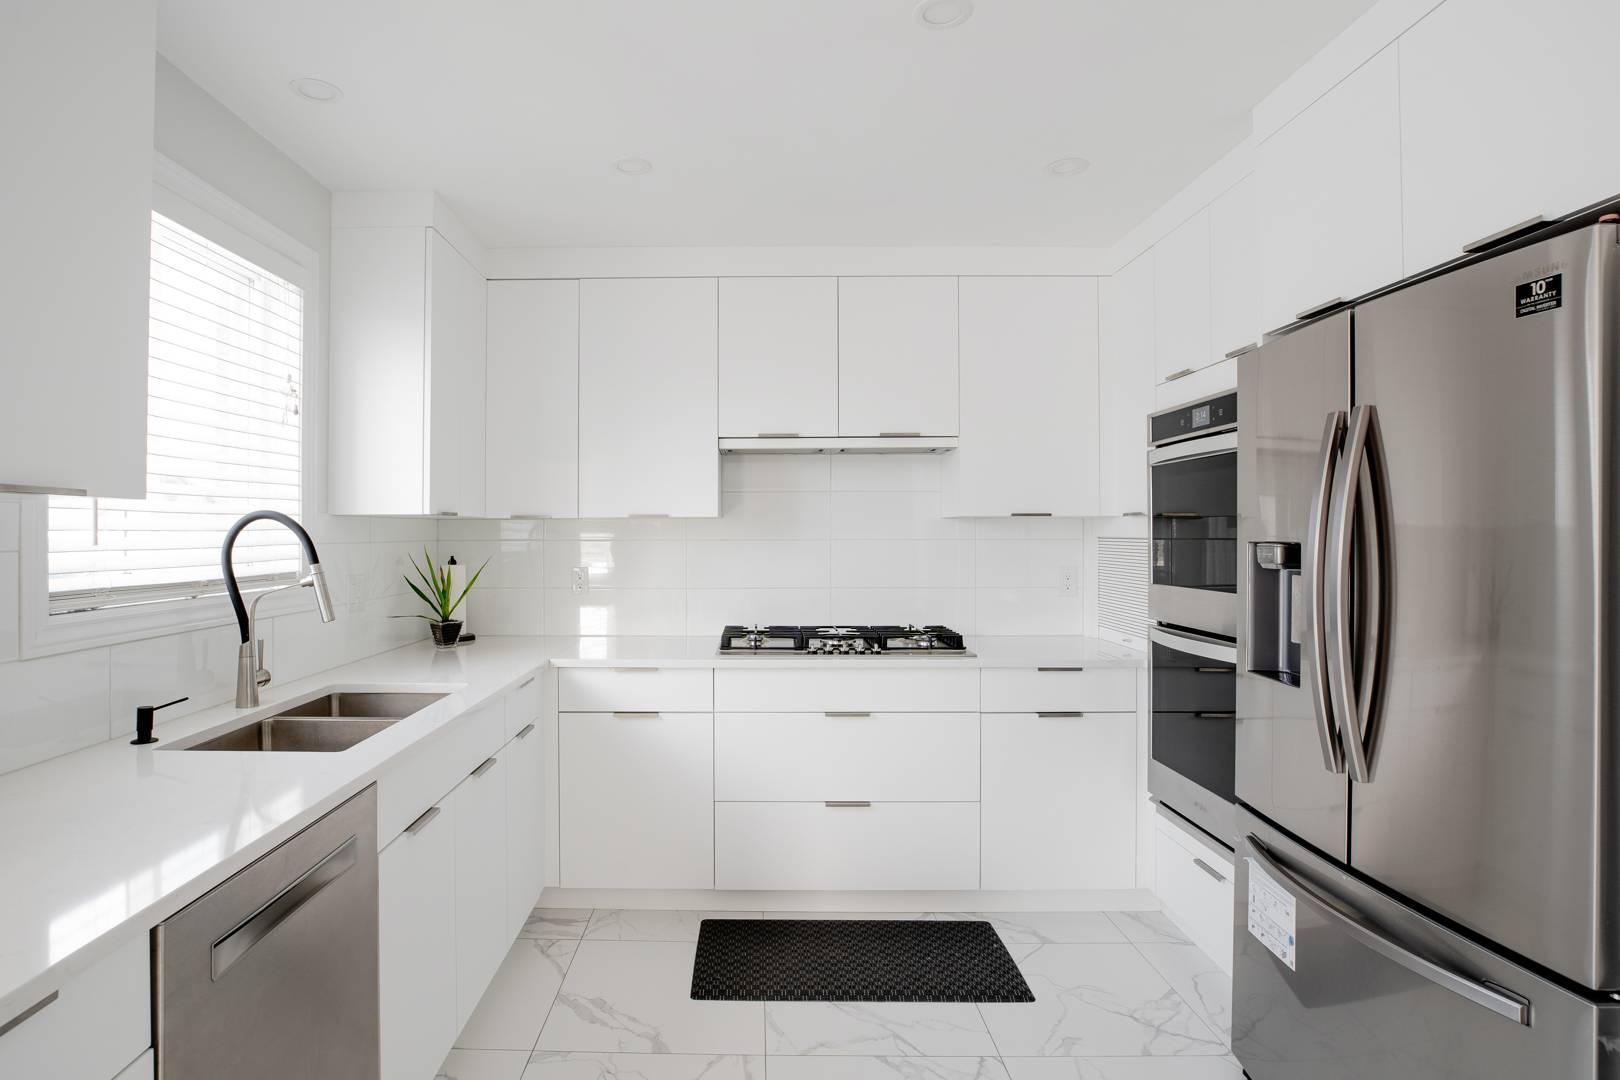 built-in kitchen appliances and white cabinetry